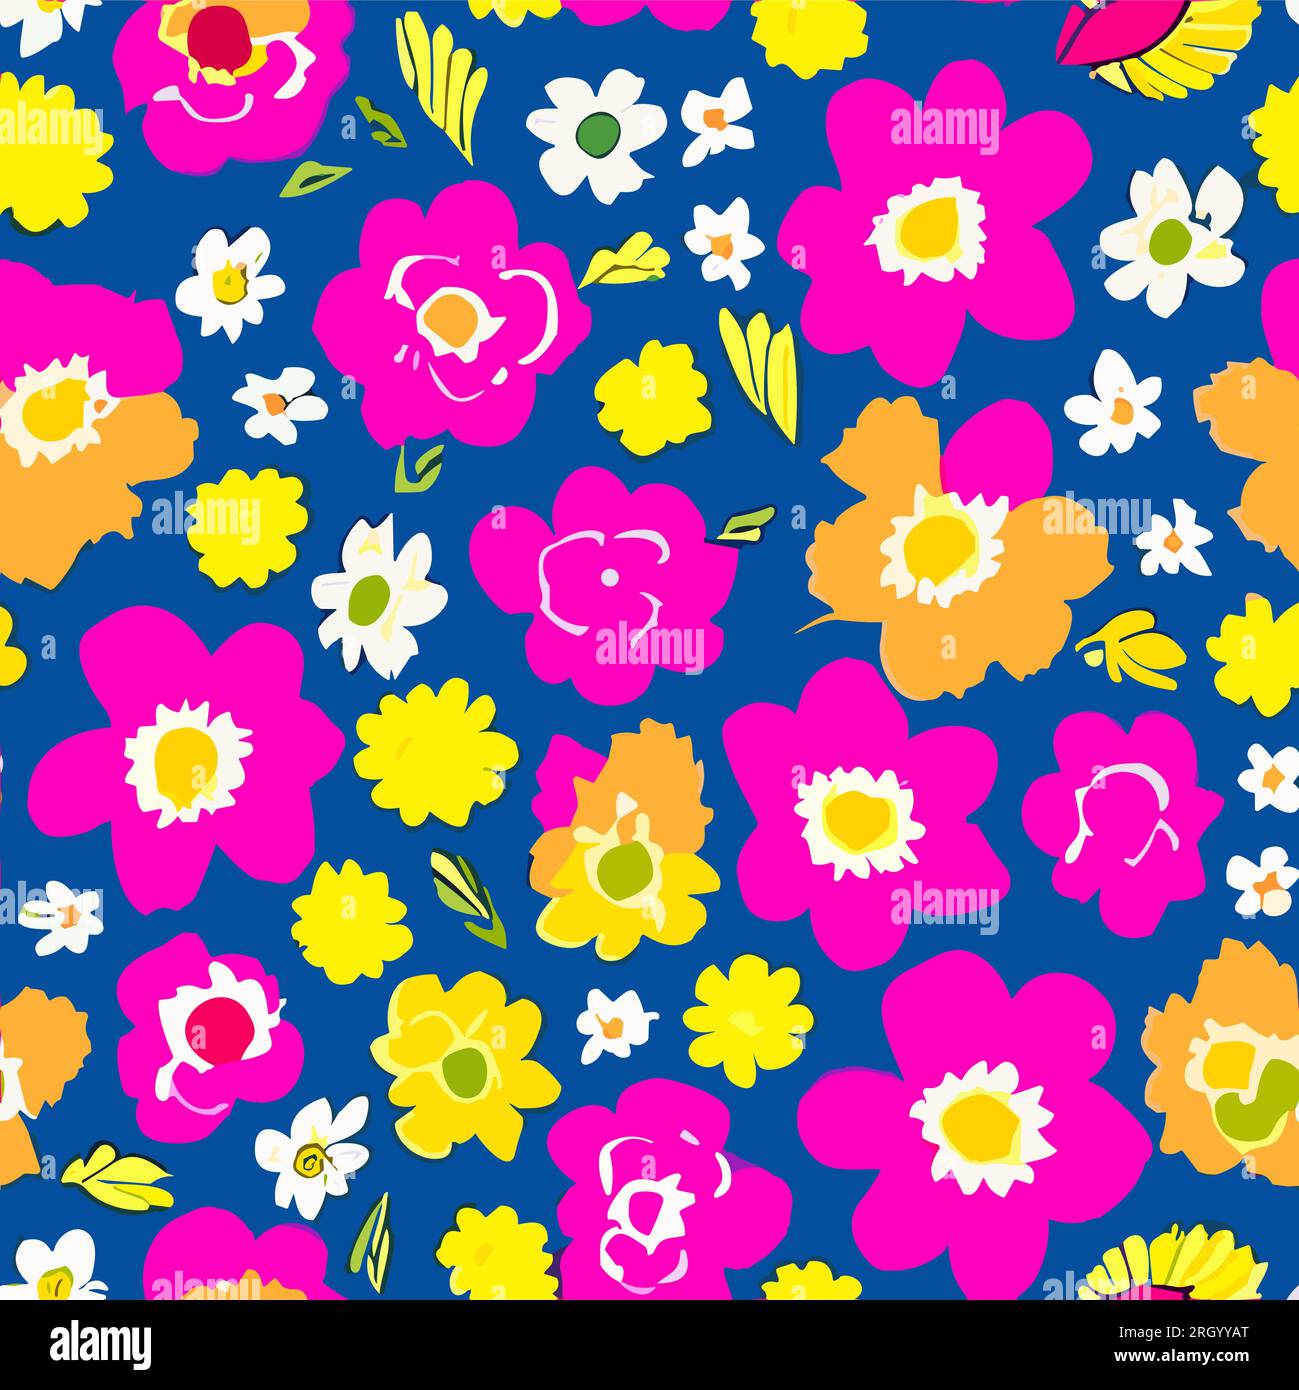 Traditional floral pattern. The colorful flowers are bright and cheerful. The flowers are arranged in an organic, random pattern, creating a unique an Stock Vector